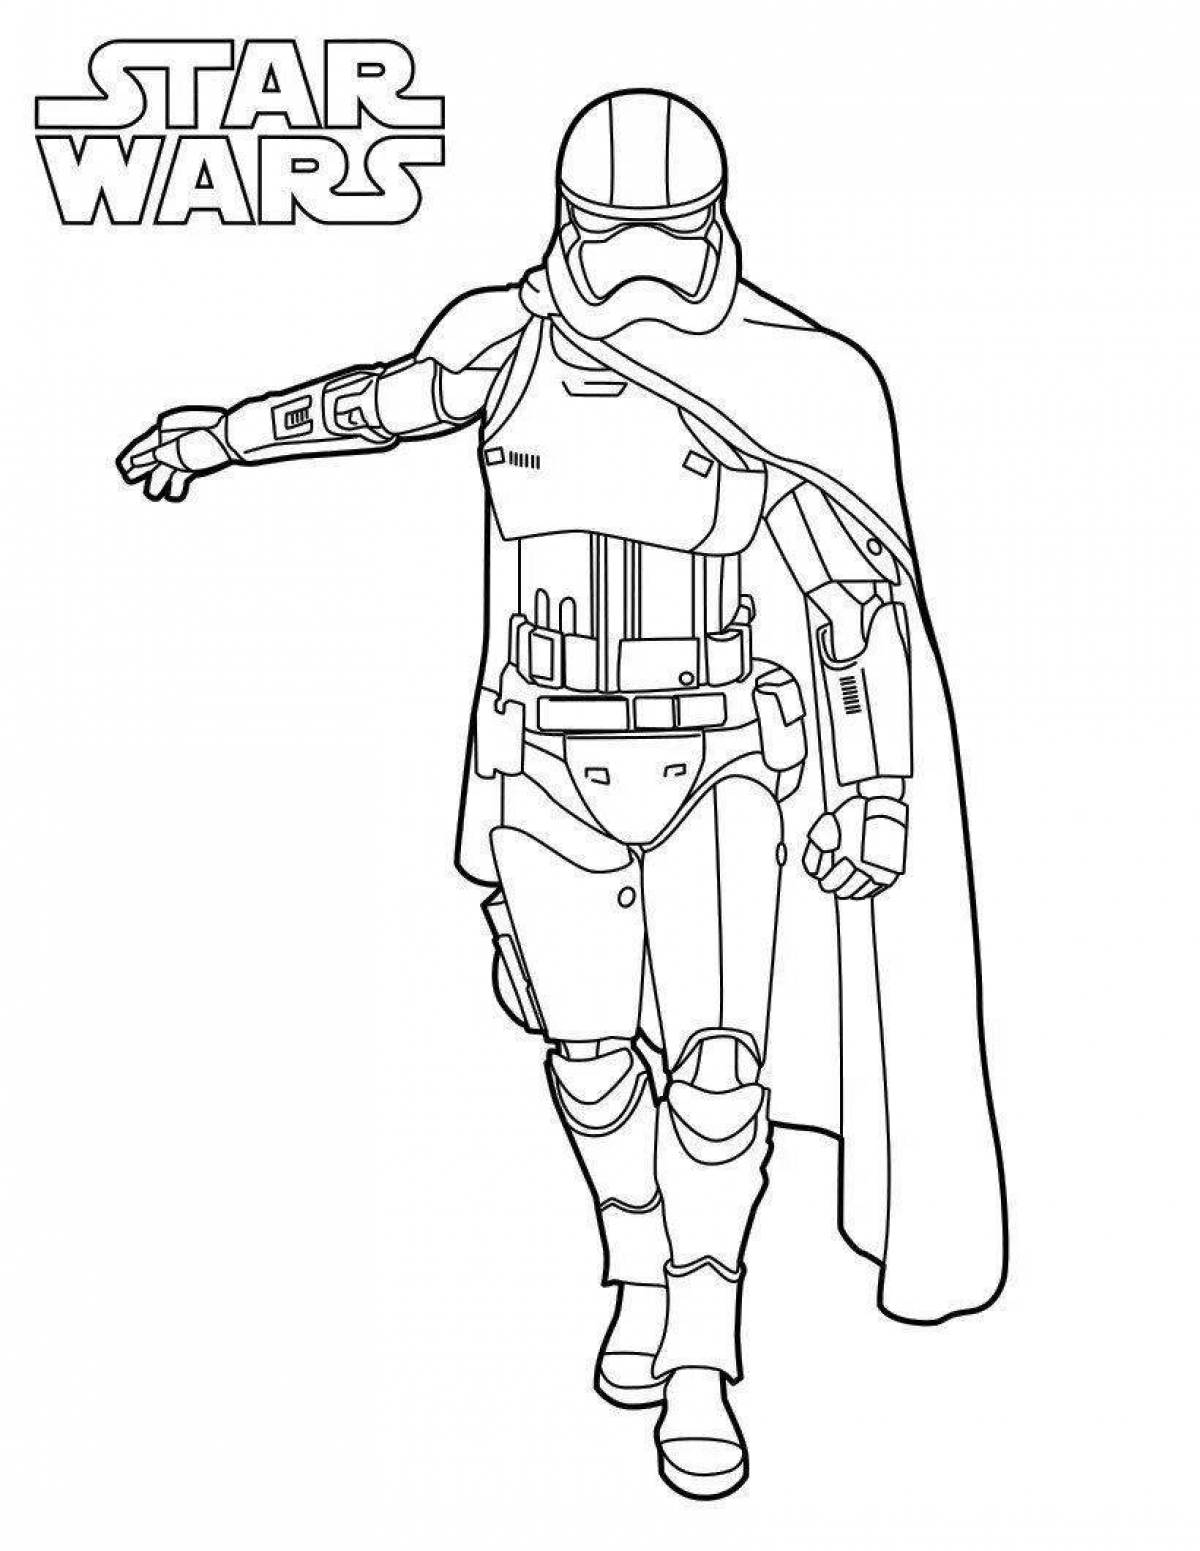 Awesome star wars coloring book